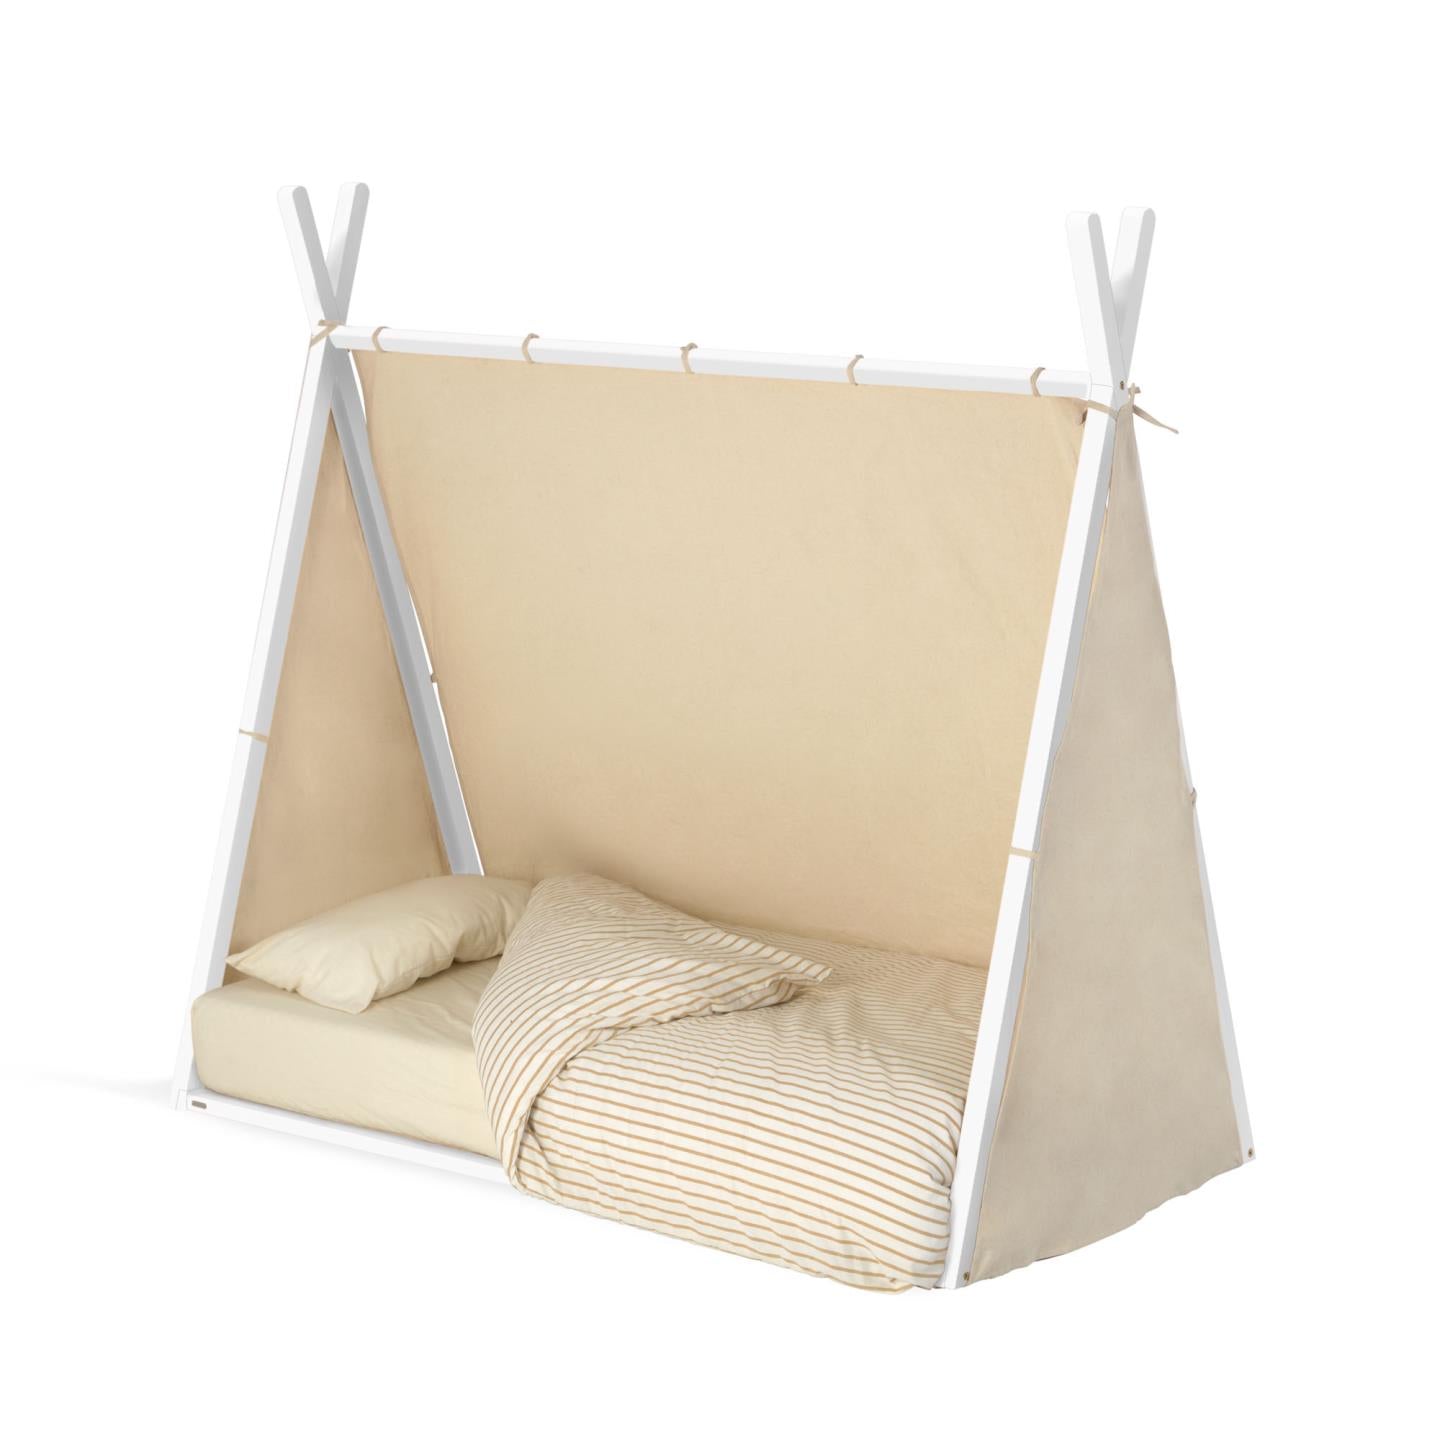 Imogen Kids Teepee Bed in Solid Beech Wood in White Finish